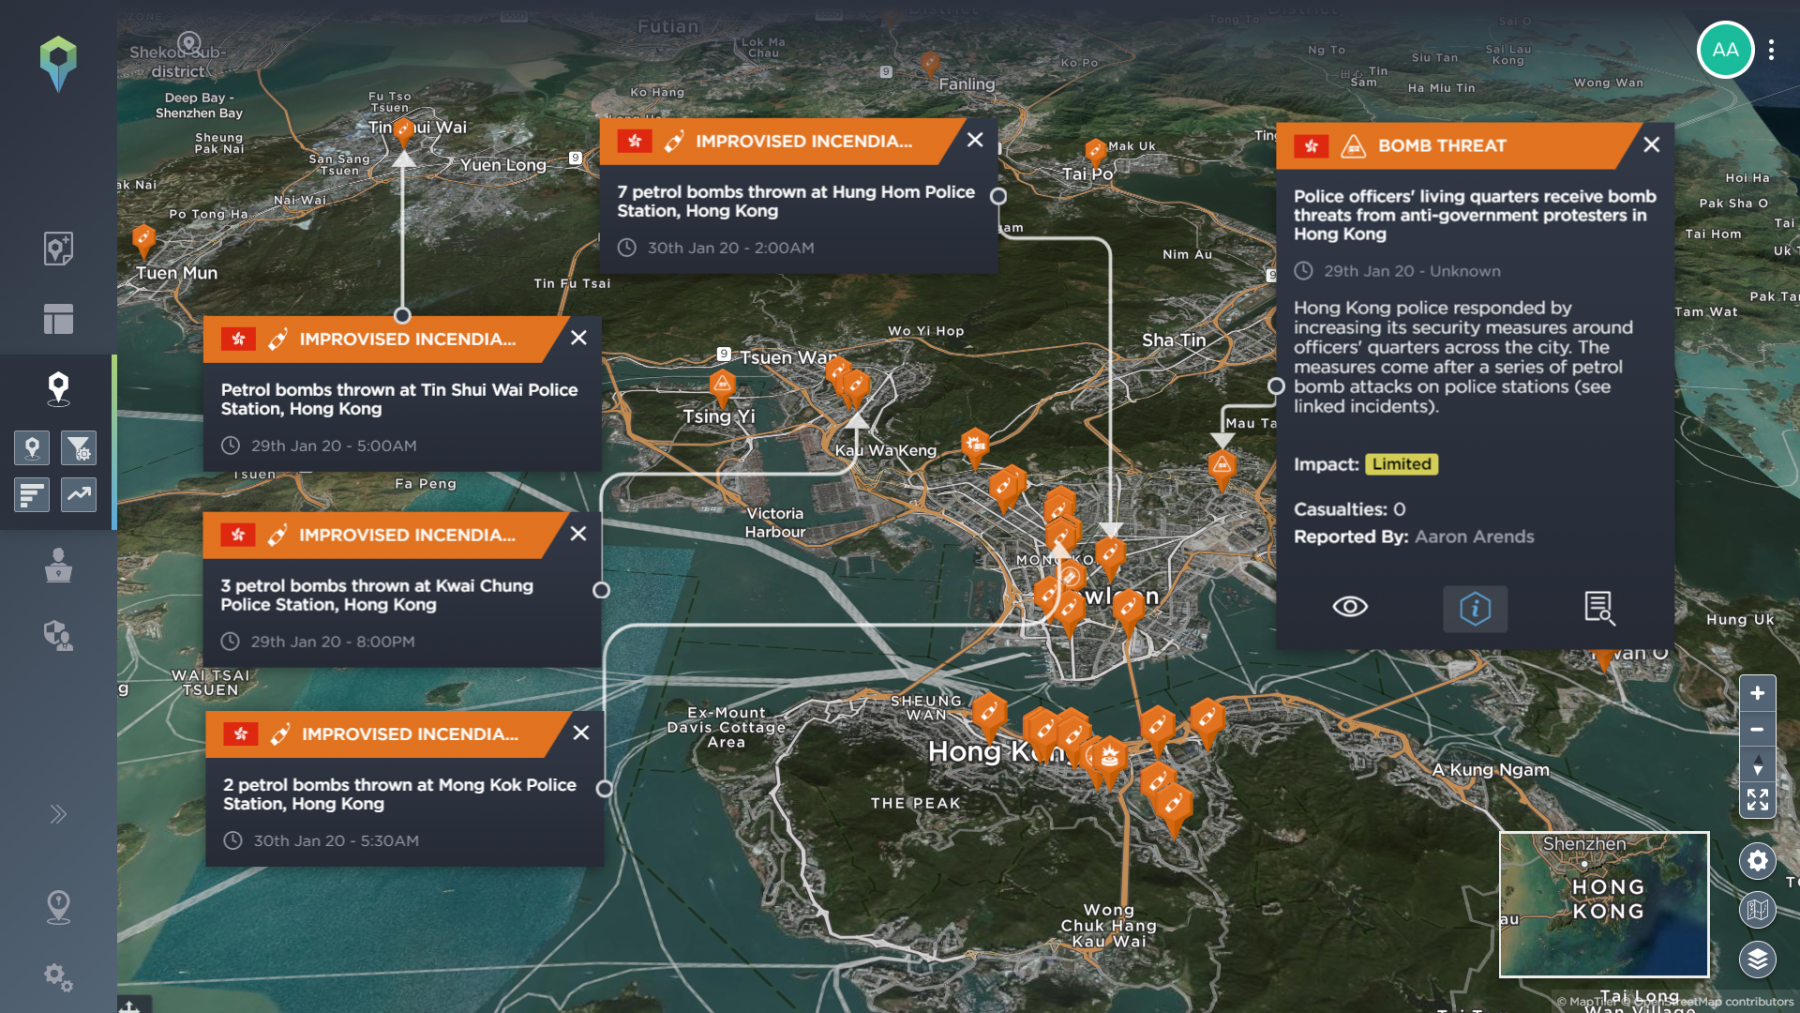 Petrol bomb attacks on police amidst all explosive-related incidents in Hong Kong since June 2019 